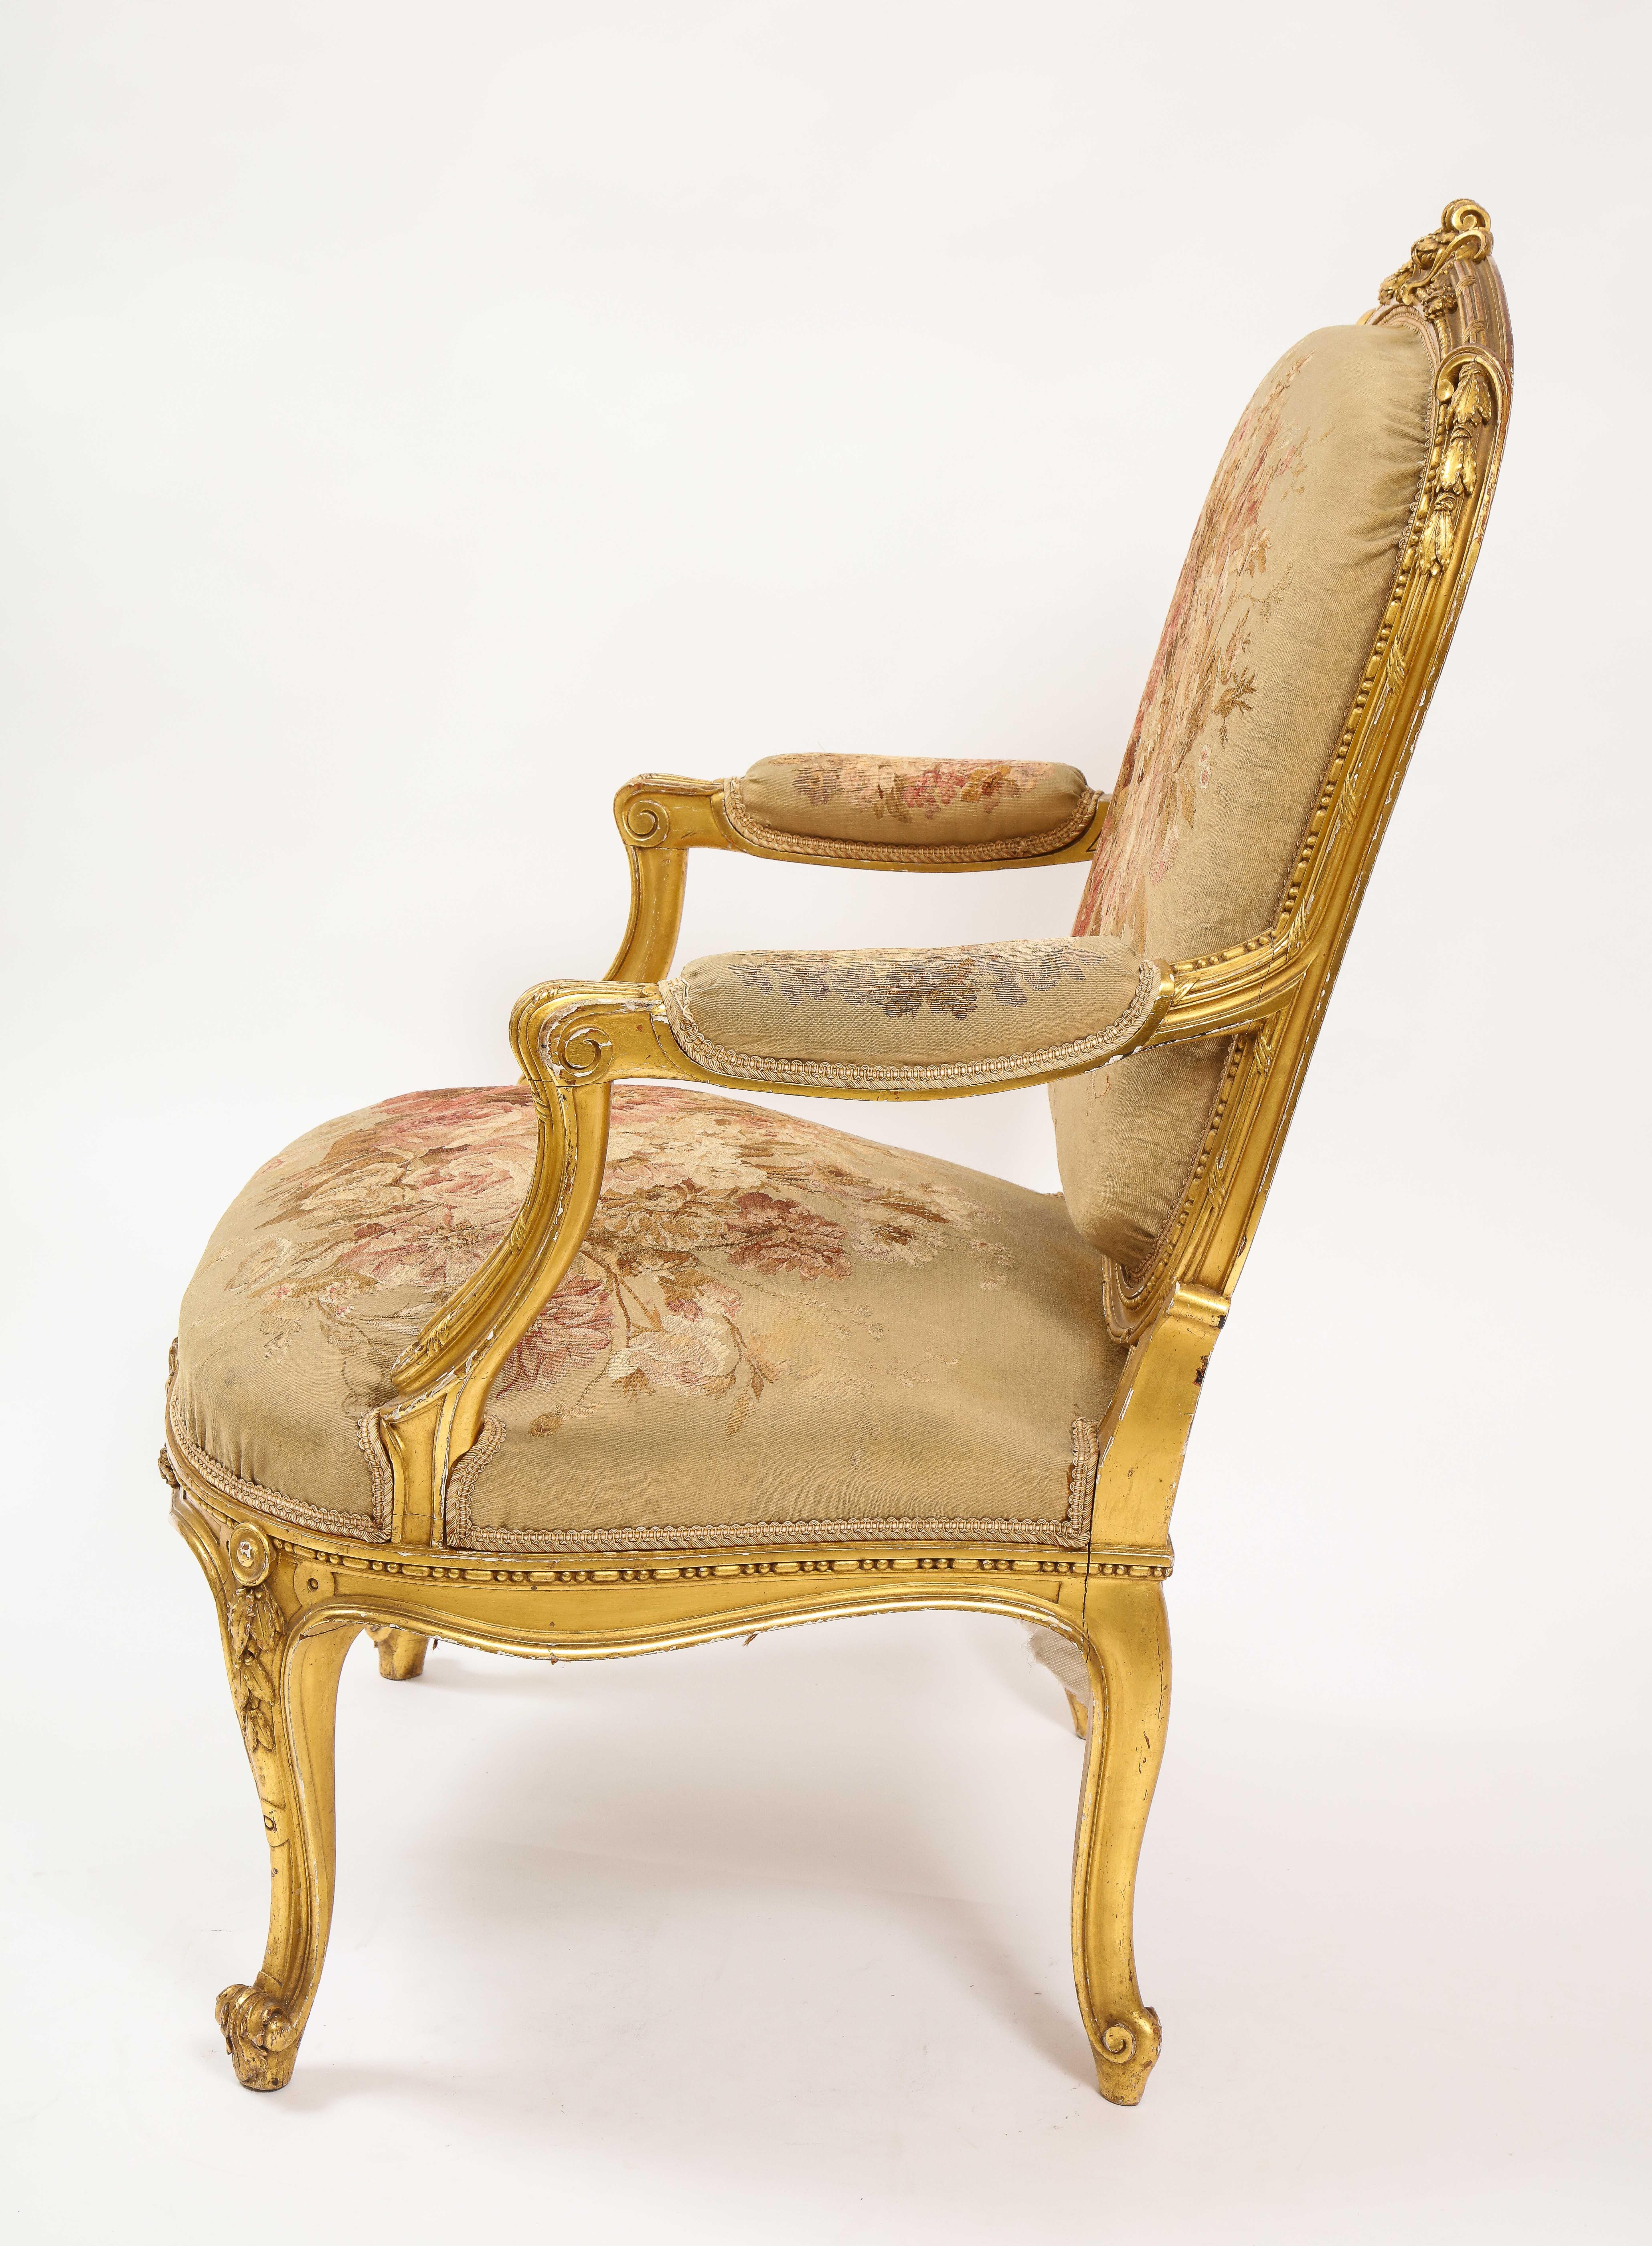 Late 19th Century An Antique French 19th C. 5 Piece Royal Giltwood & Aubusson Suite, Att. Linke